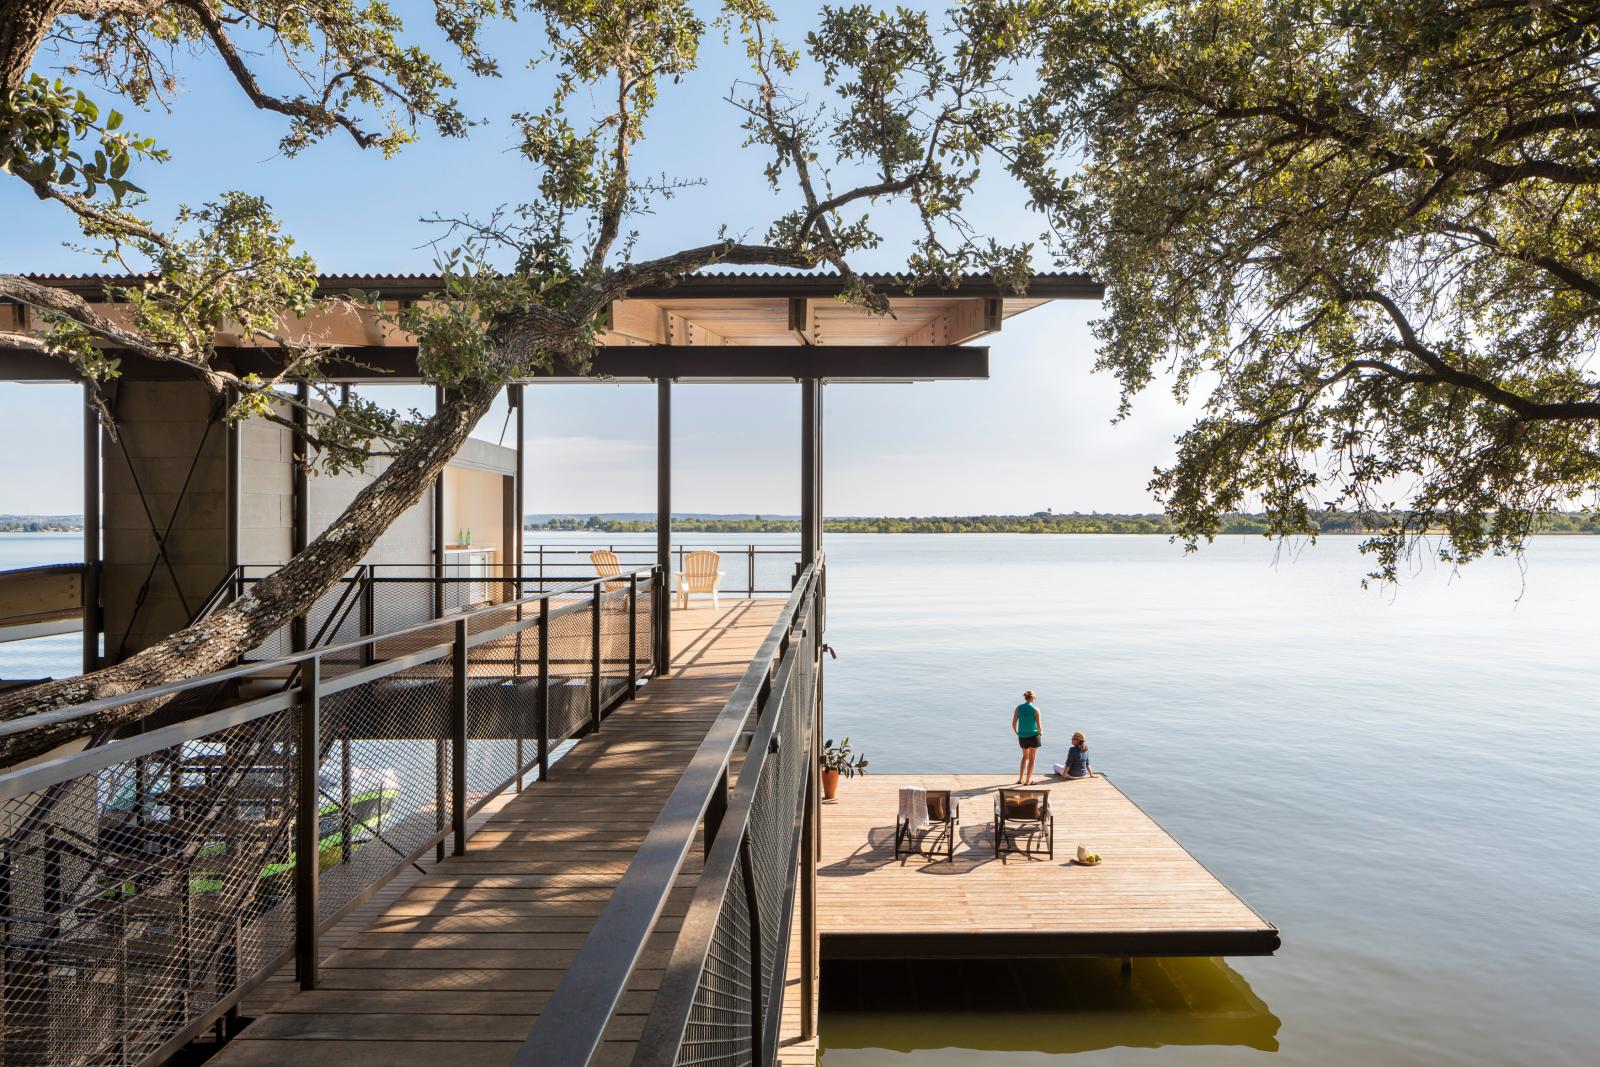 Blue Lake Retreat&#039;s two-story boathouse and swim deck mimic the home’s design, echoing its connection to the land by utilizing a similar bridge to unite the site’s varied landforms.